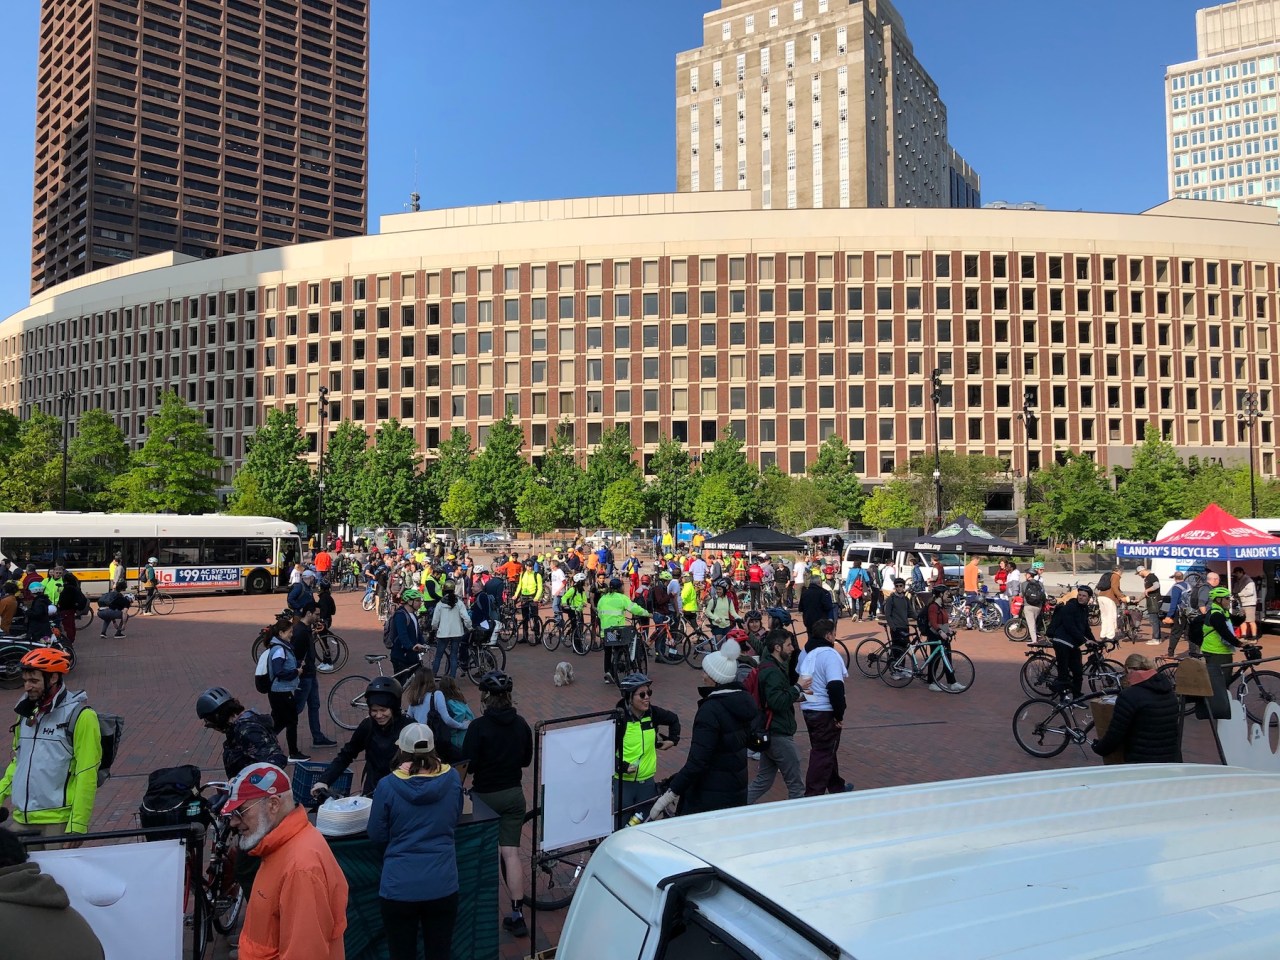 A crowd of over 100 people, many of whom are walking with their bicycles, gathers in a large brick-paved plaza. Several tents around the edge of the plaza advertise local bike shops. In the distance are the skyscrapers of downtown Boston.